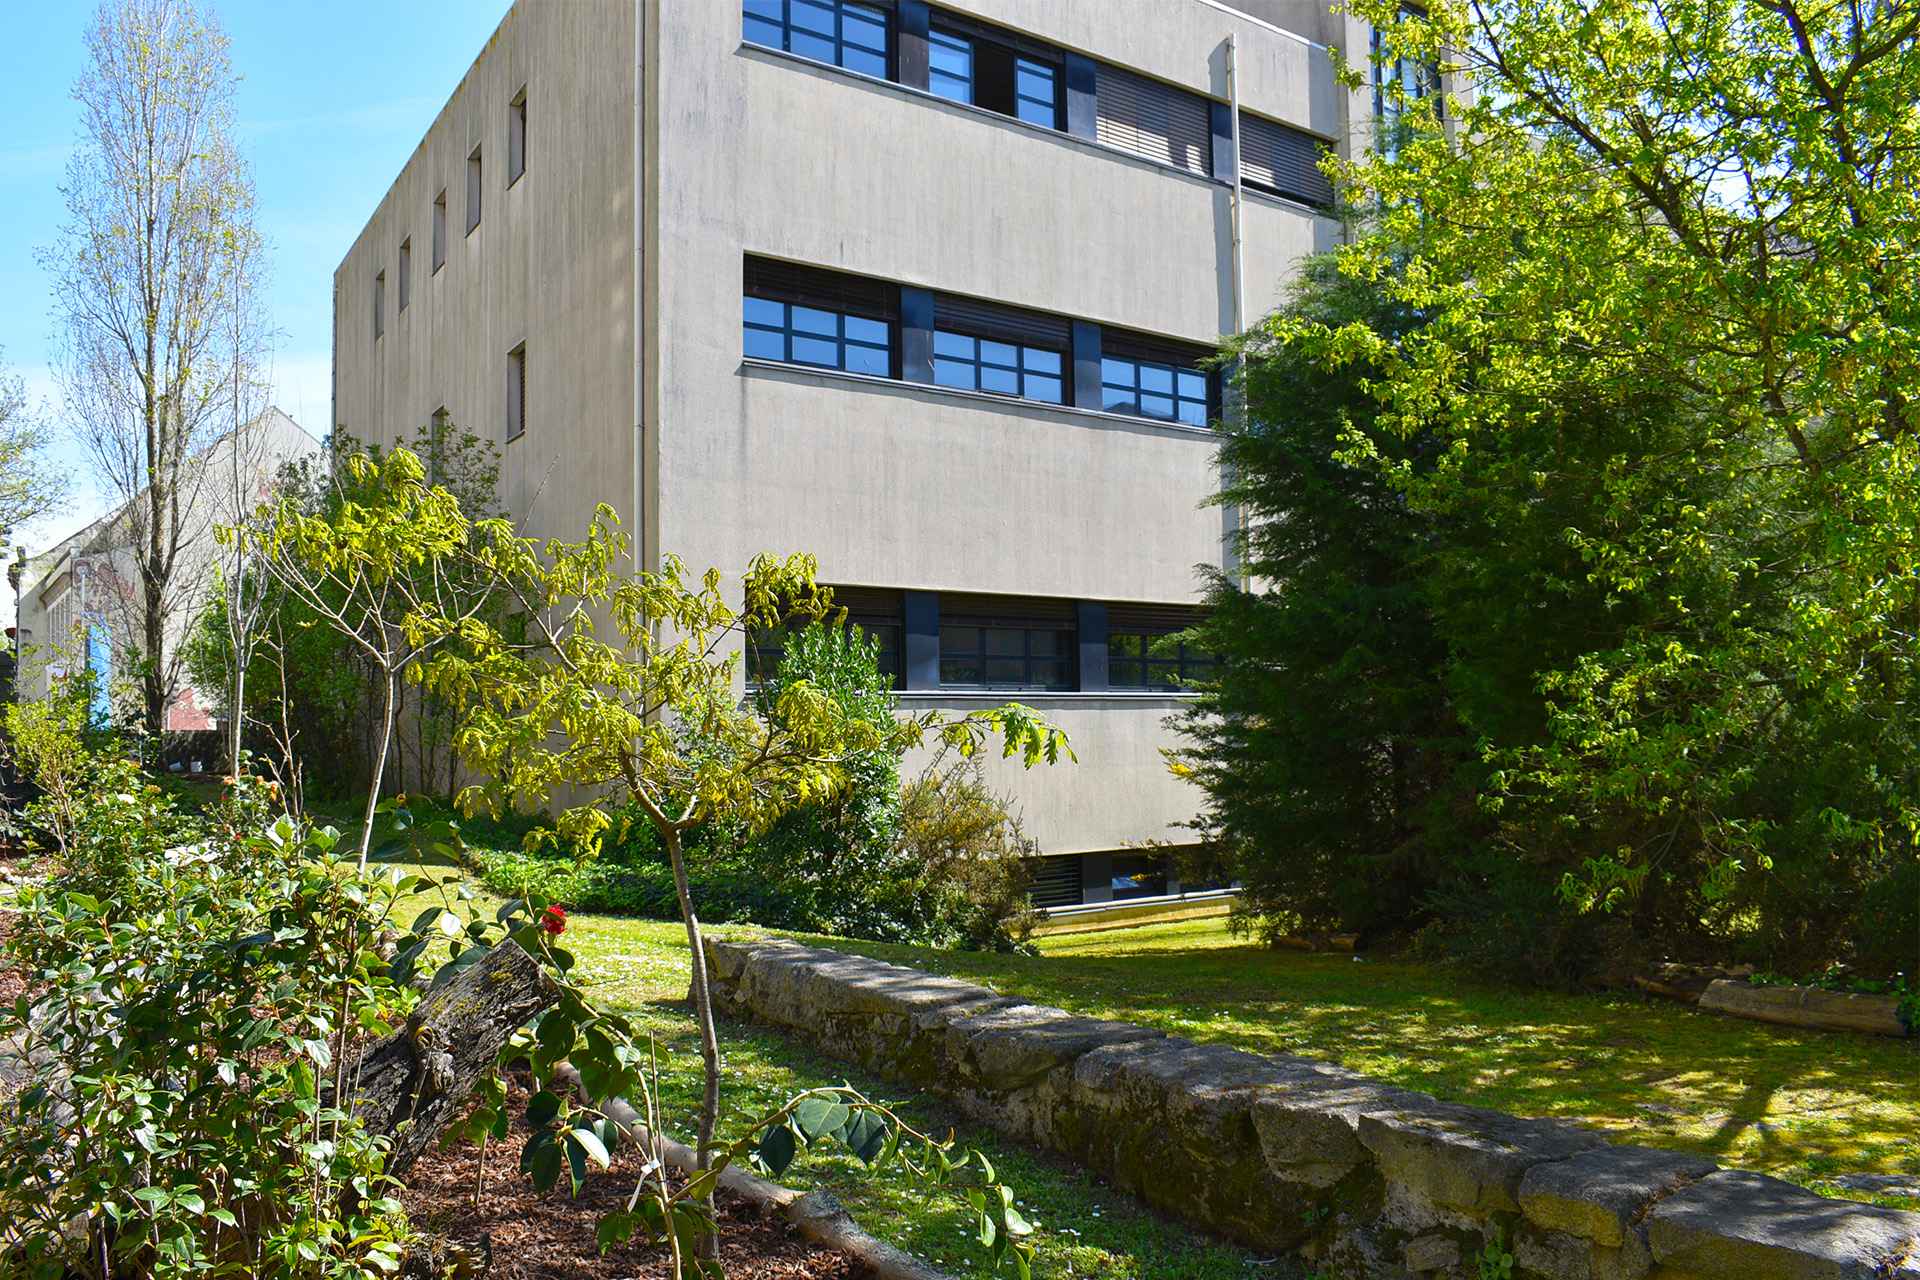 Building of the Faculty of Sciences of the University of Porto